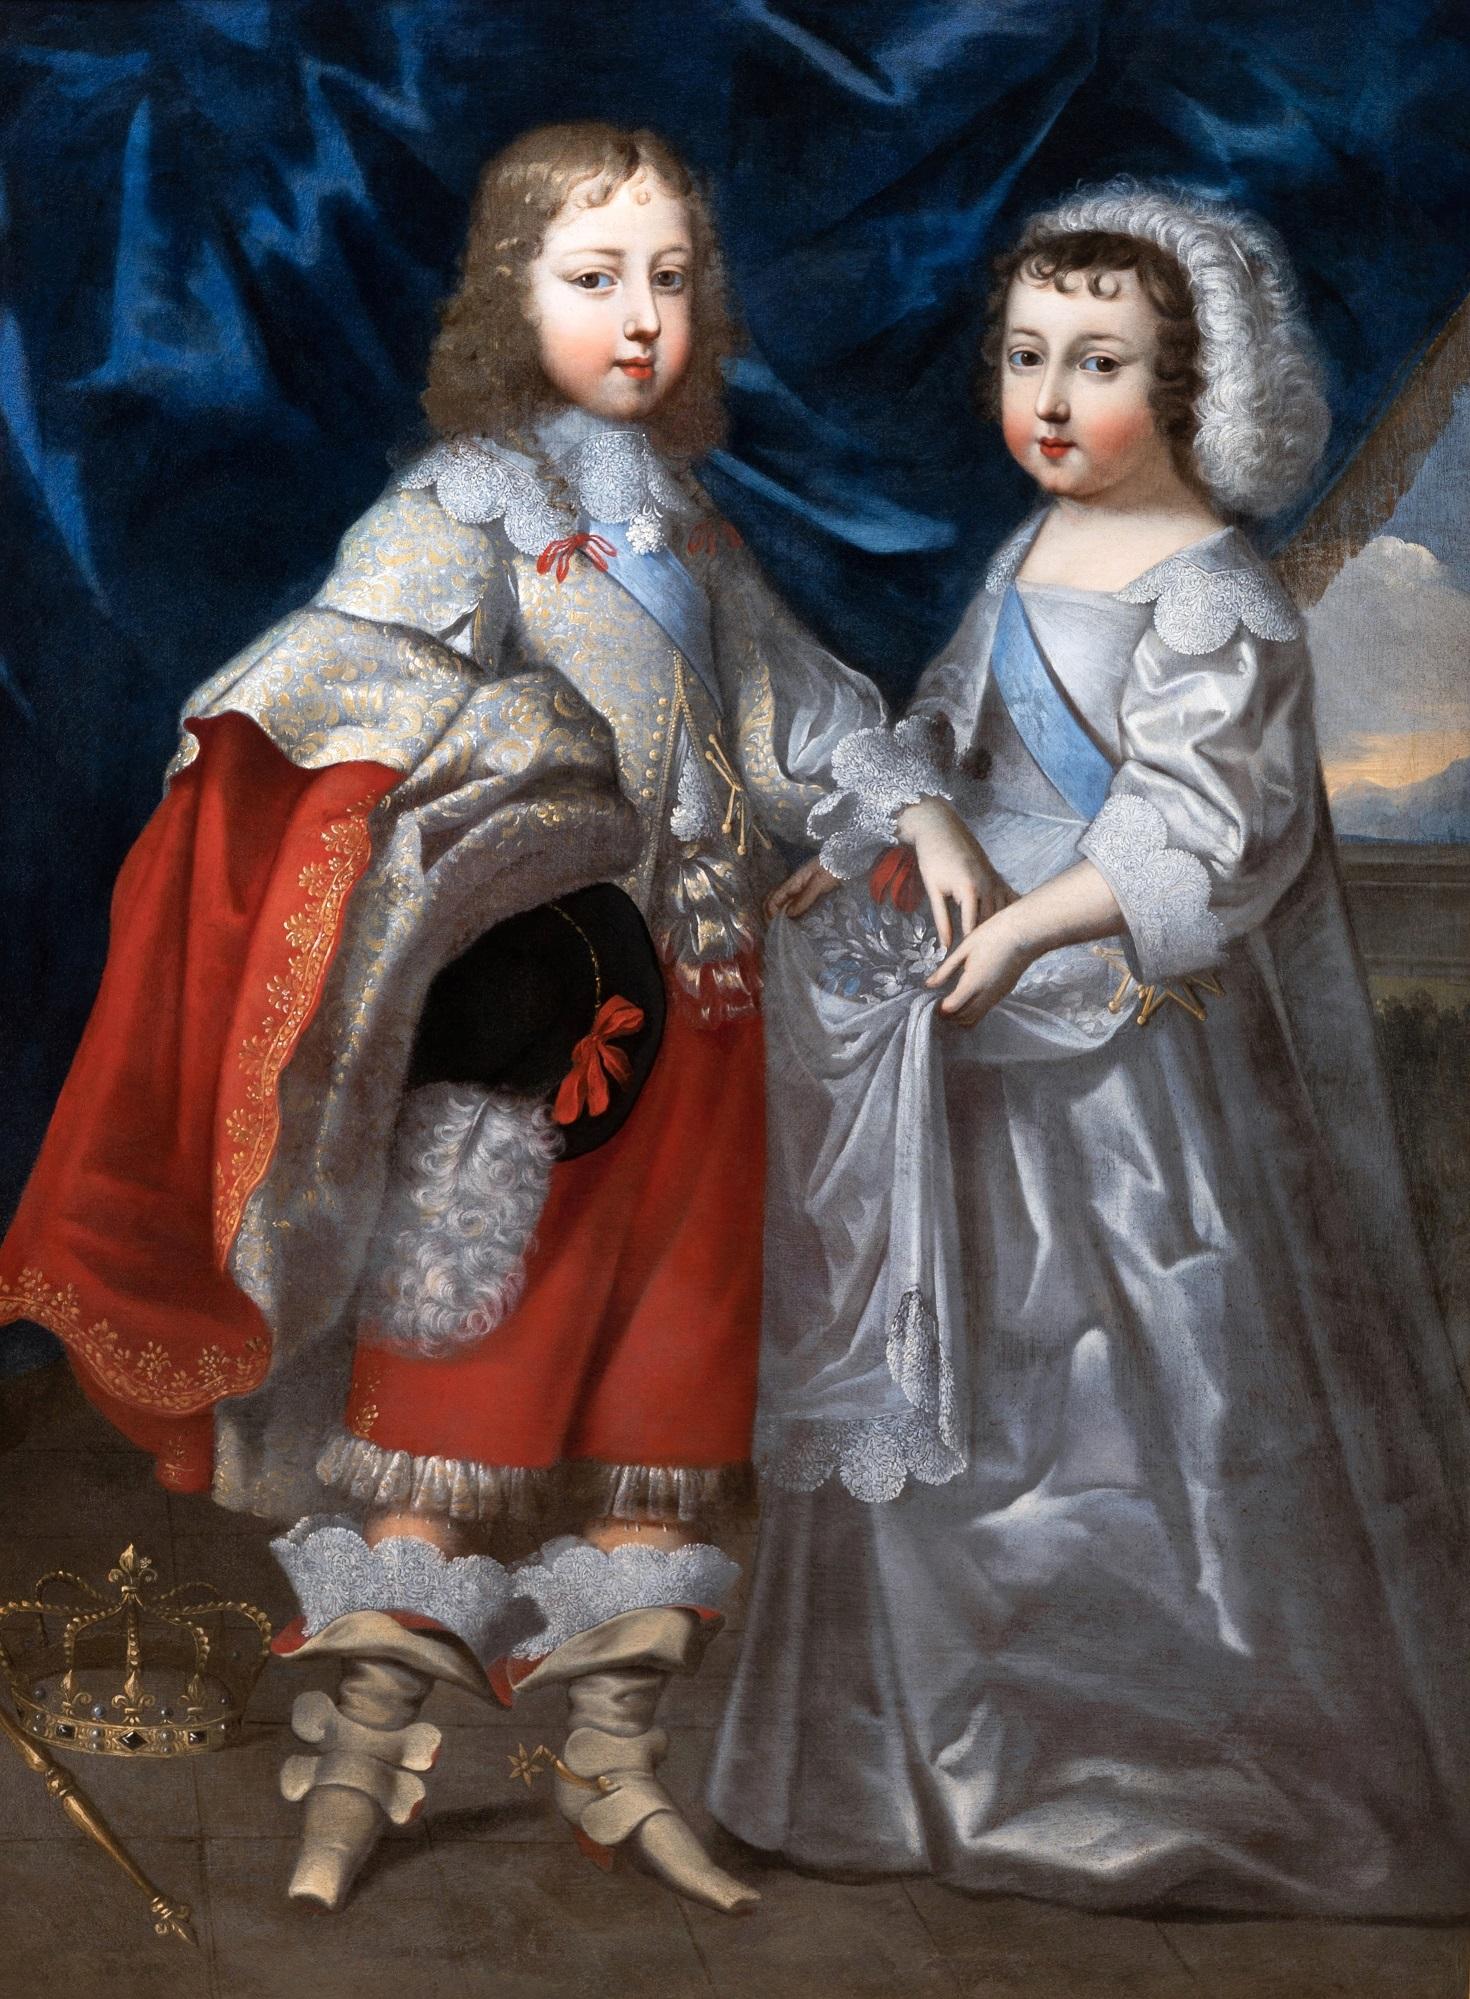 17th French Portrait of Louis XIV & his brother, c. 1645, attributed to Beaubrun - Painting by Studio of Charles Beaubrun